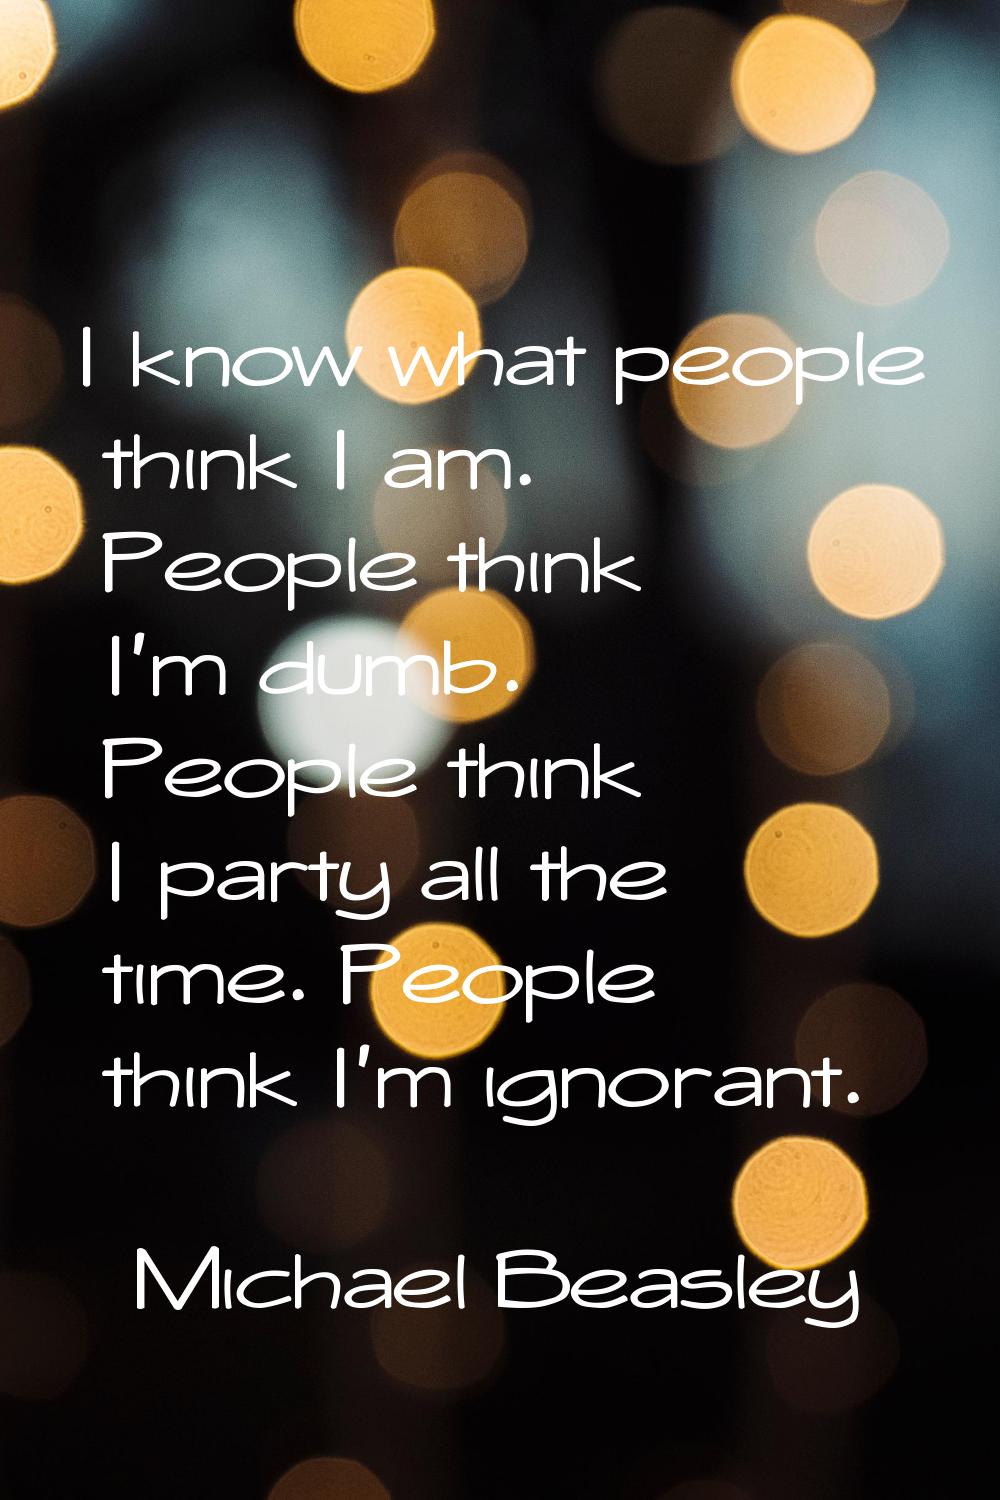 I know what people think I am. People think I'm dumb. People think I party all the time. People thi